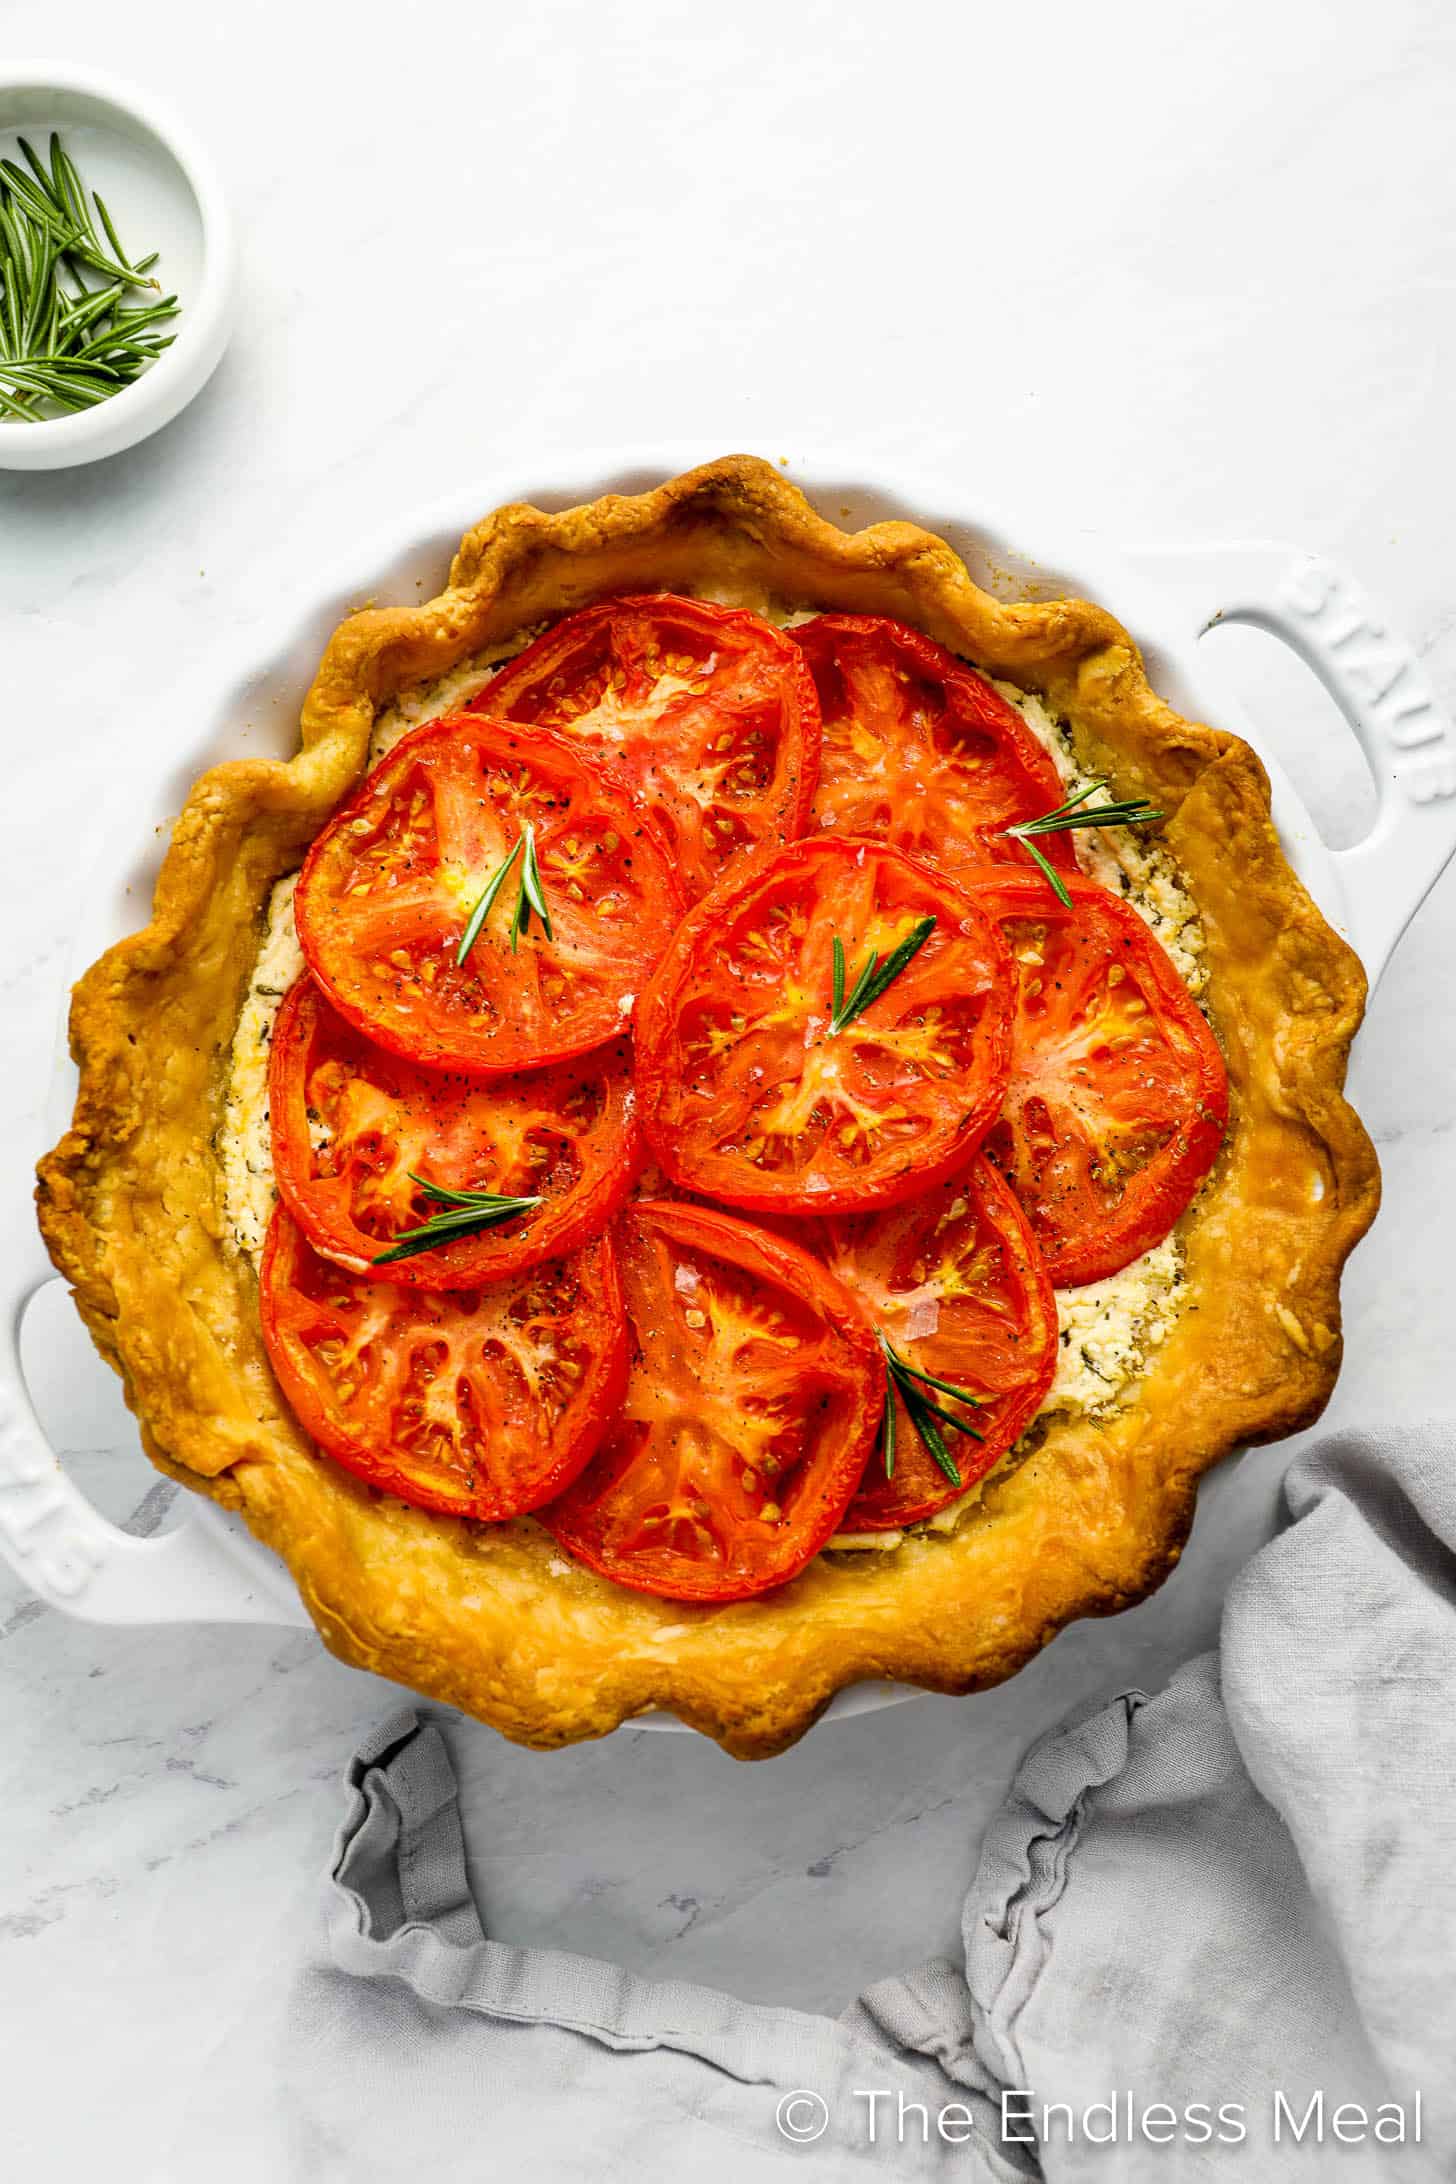 A Tomato Tart hot out of the oven.